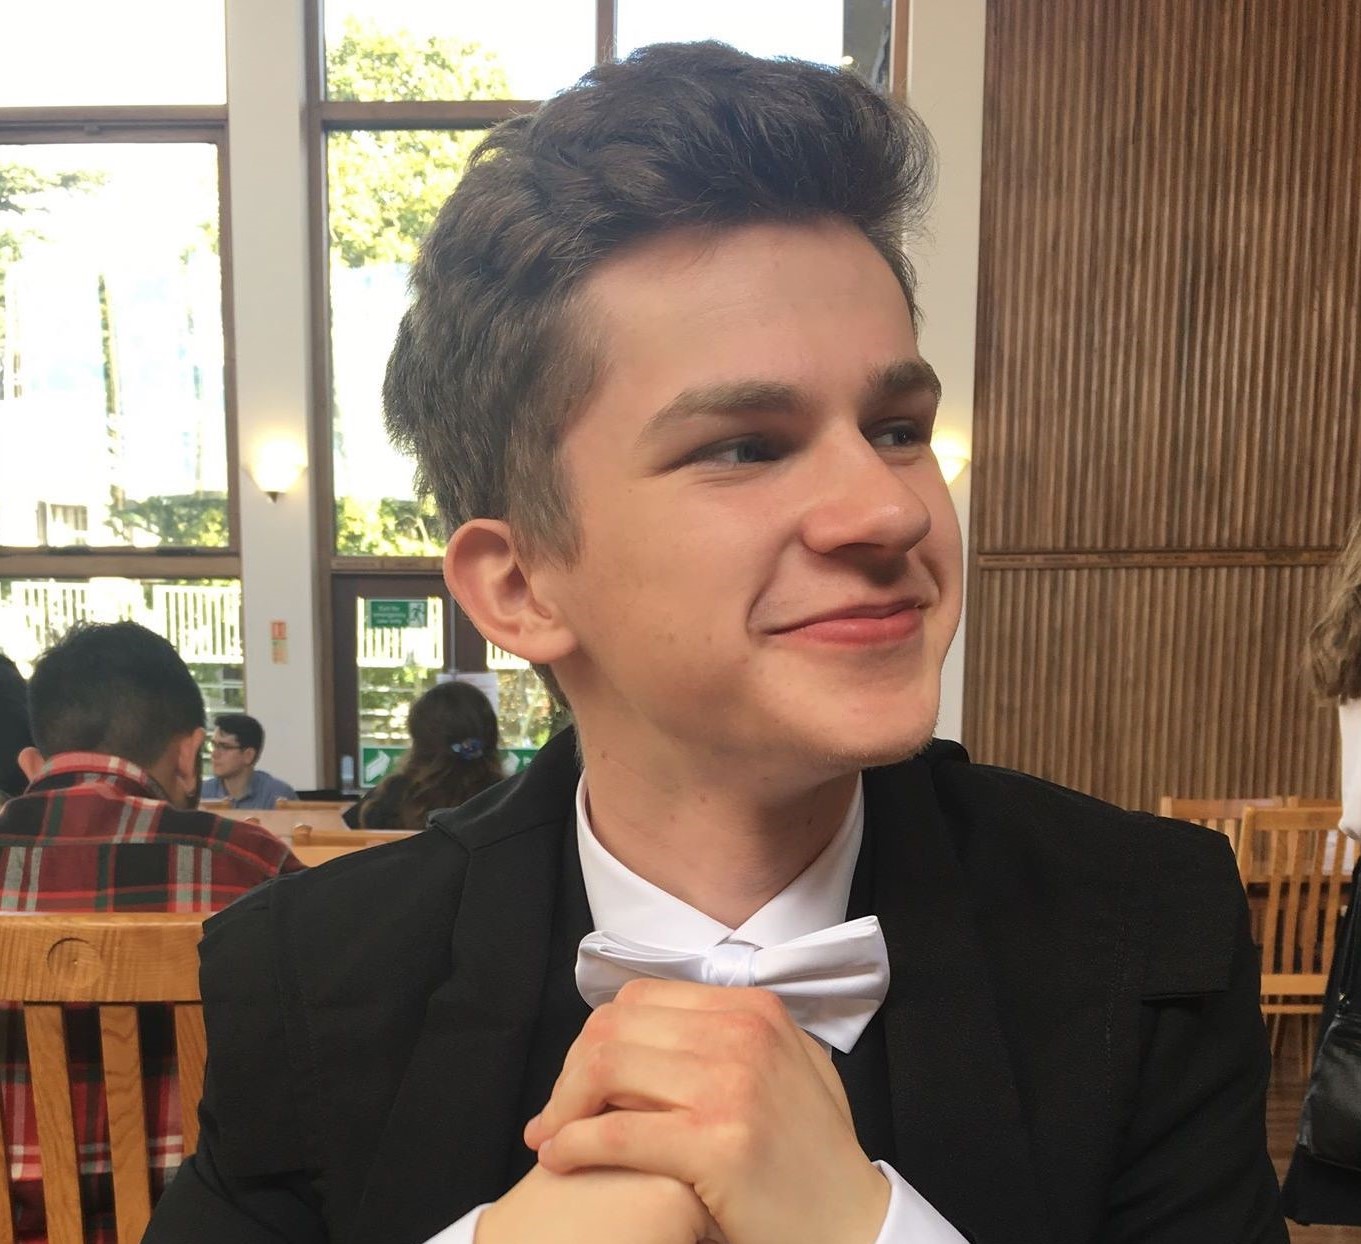 picture of Nat looking smart in a bow tie & suit